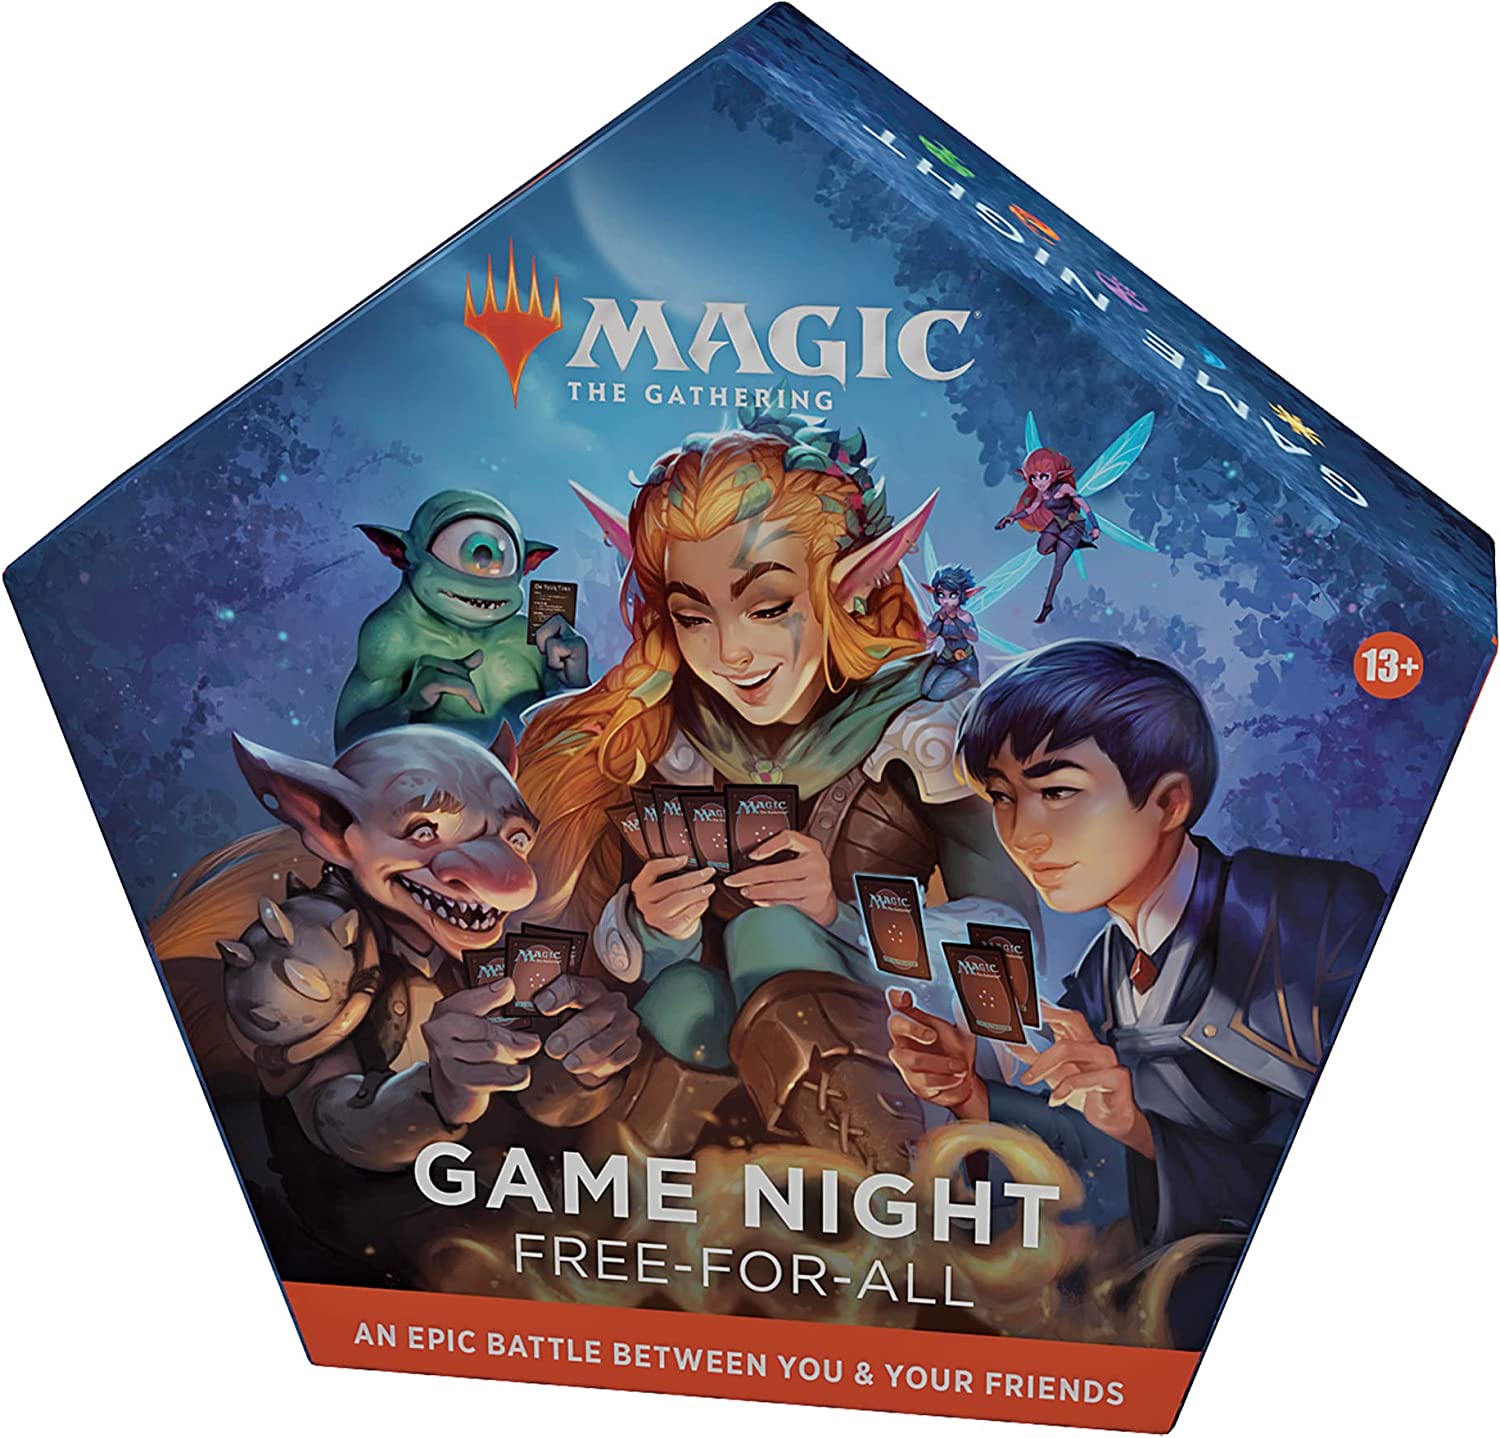 (BSG Certified USED) Magic: The Gathering - Game Night Free-For-All